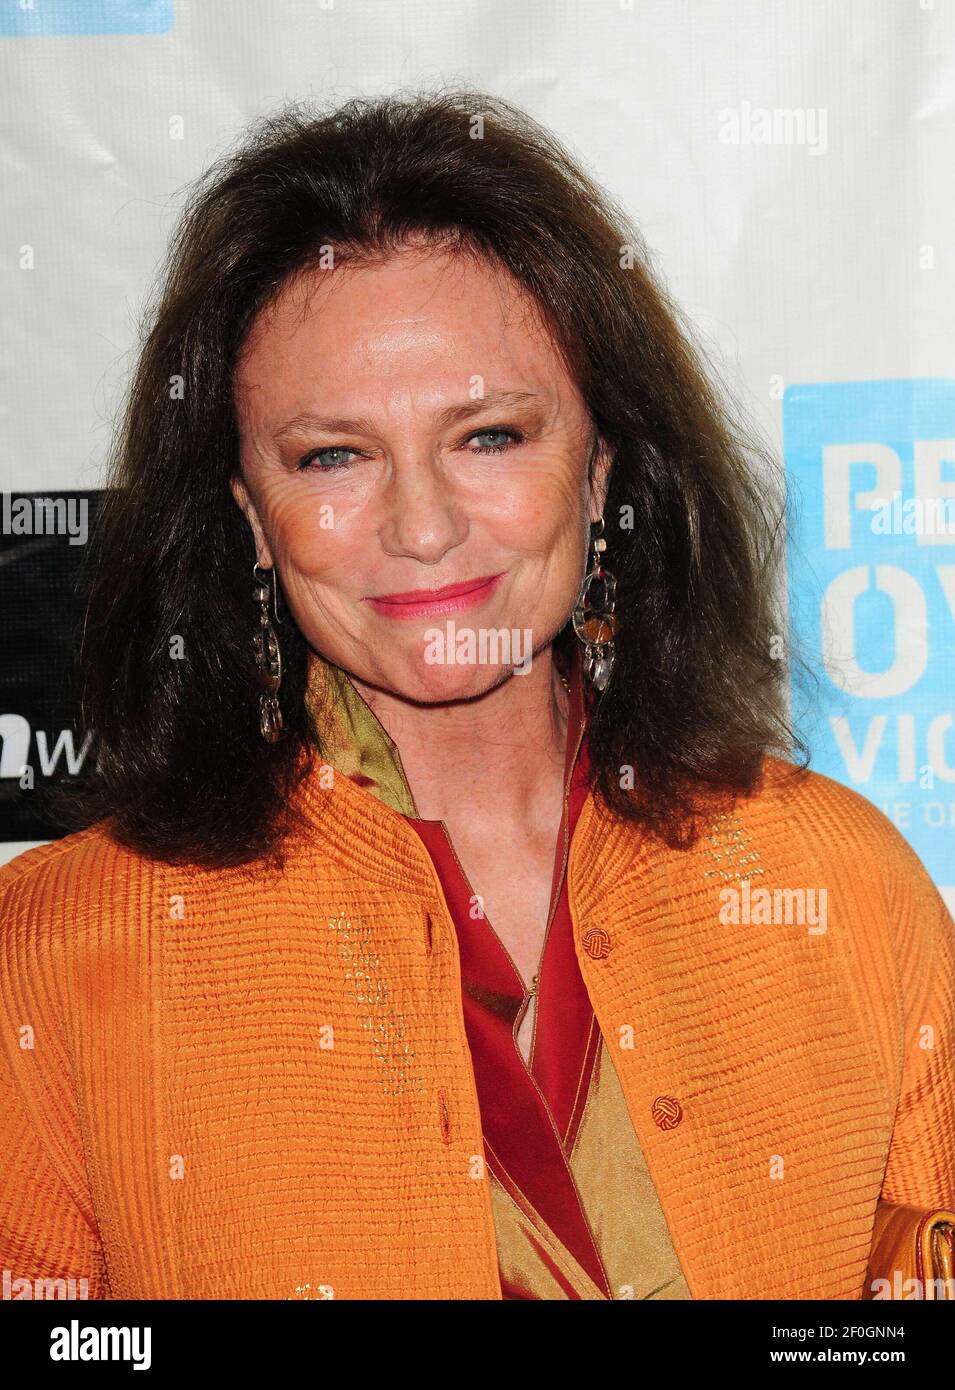 Jacqueline Bisset. 30 October 2010, Beverly Hills, CA. "Peace Over Violence" 39th Annual Humanitarian Awards presented by Verizon Wireless at the Beverly Hills Hotel. Photo Credit: Giulio Marcocchi/Sipa Press./Peace_gm.056/1010312144 Stock Photo